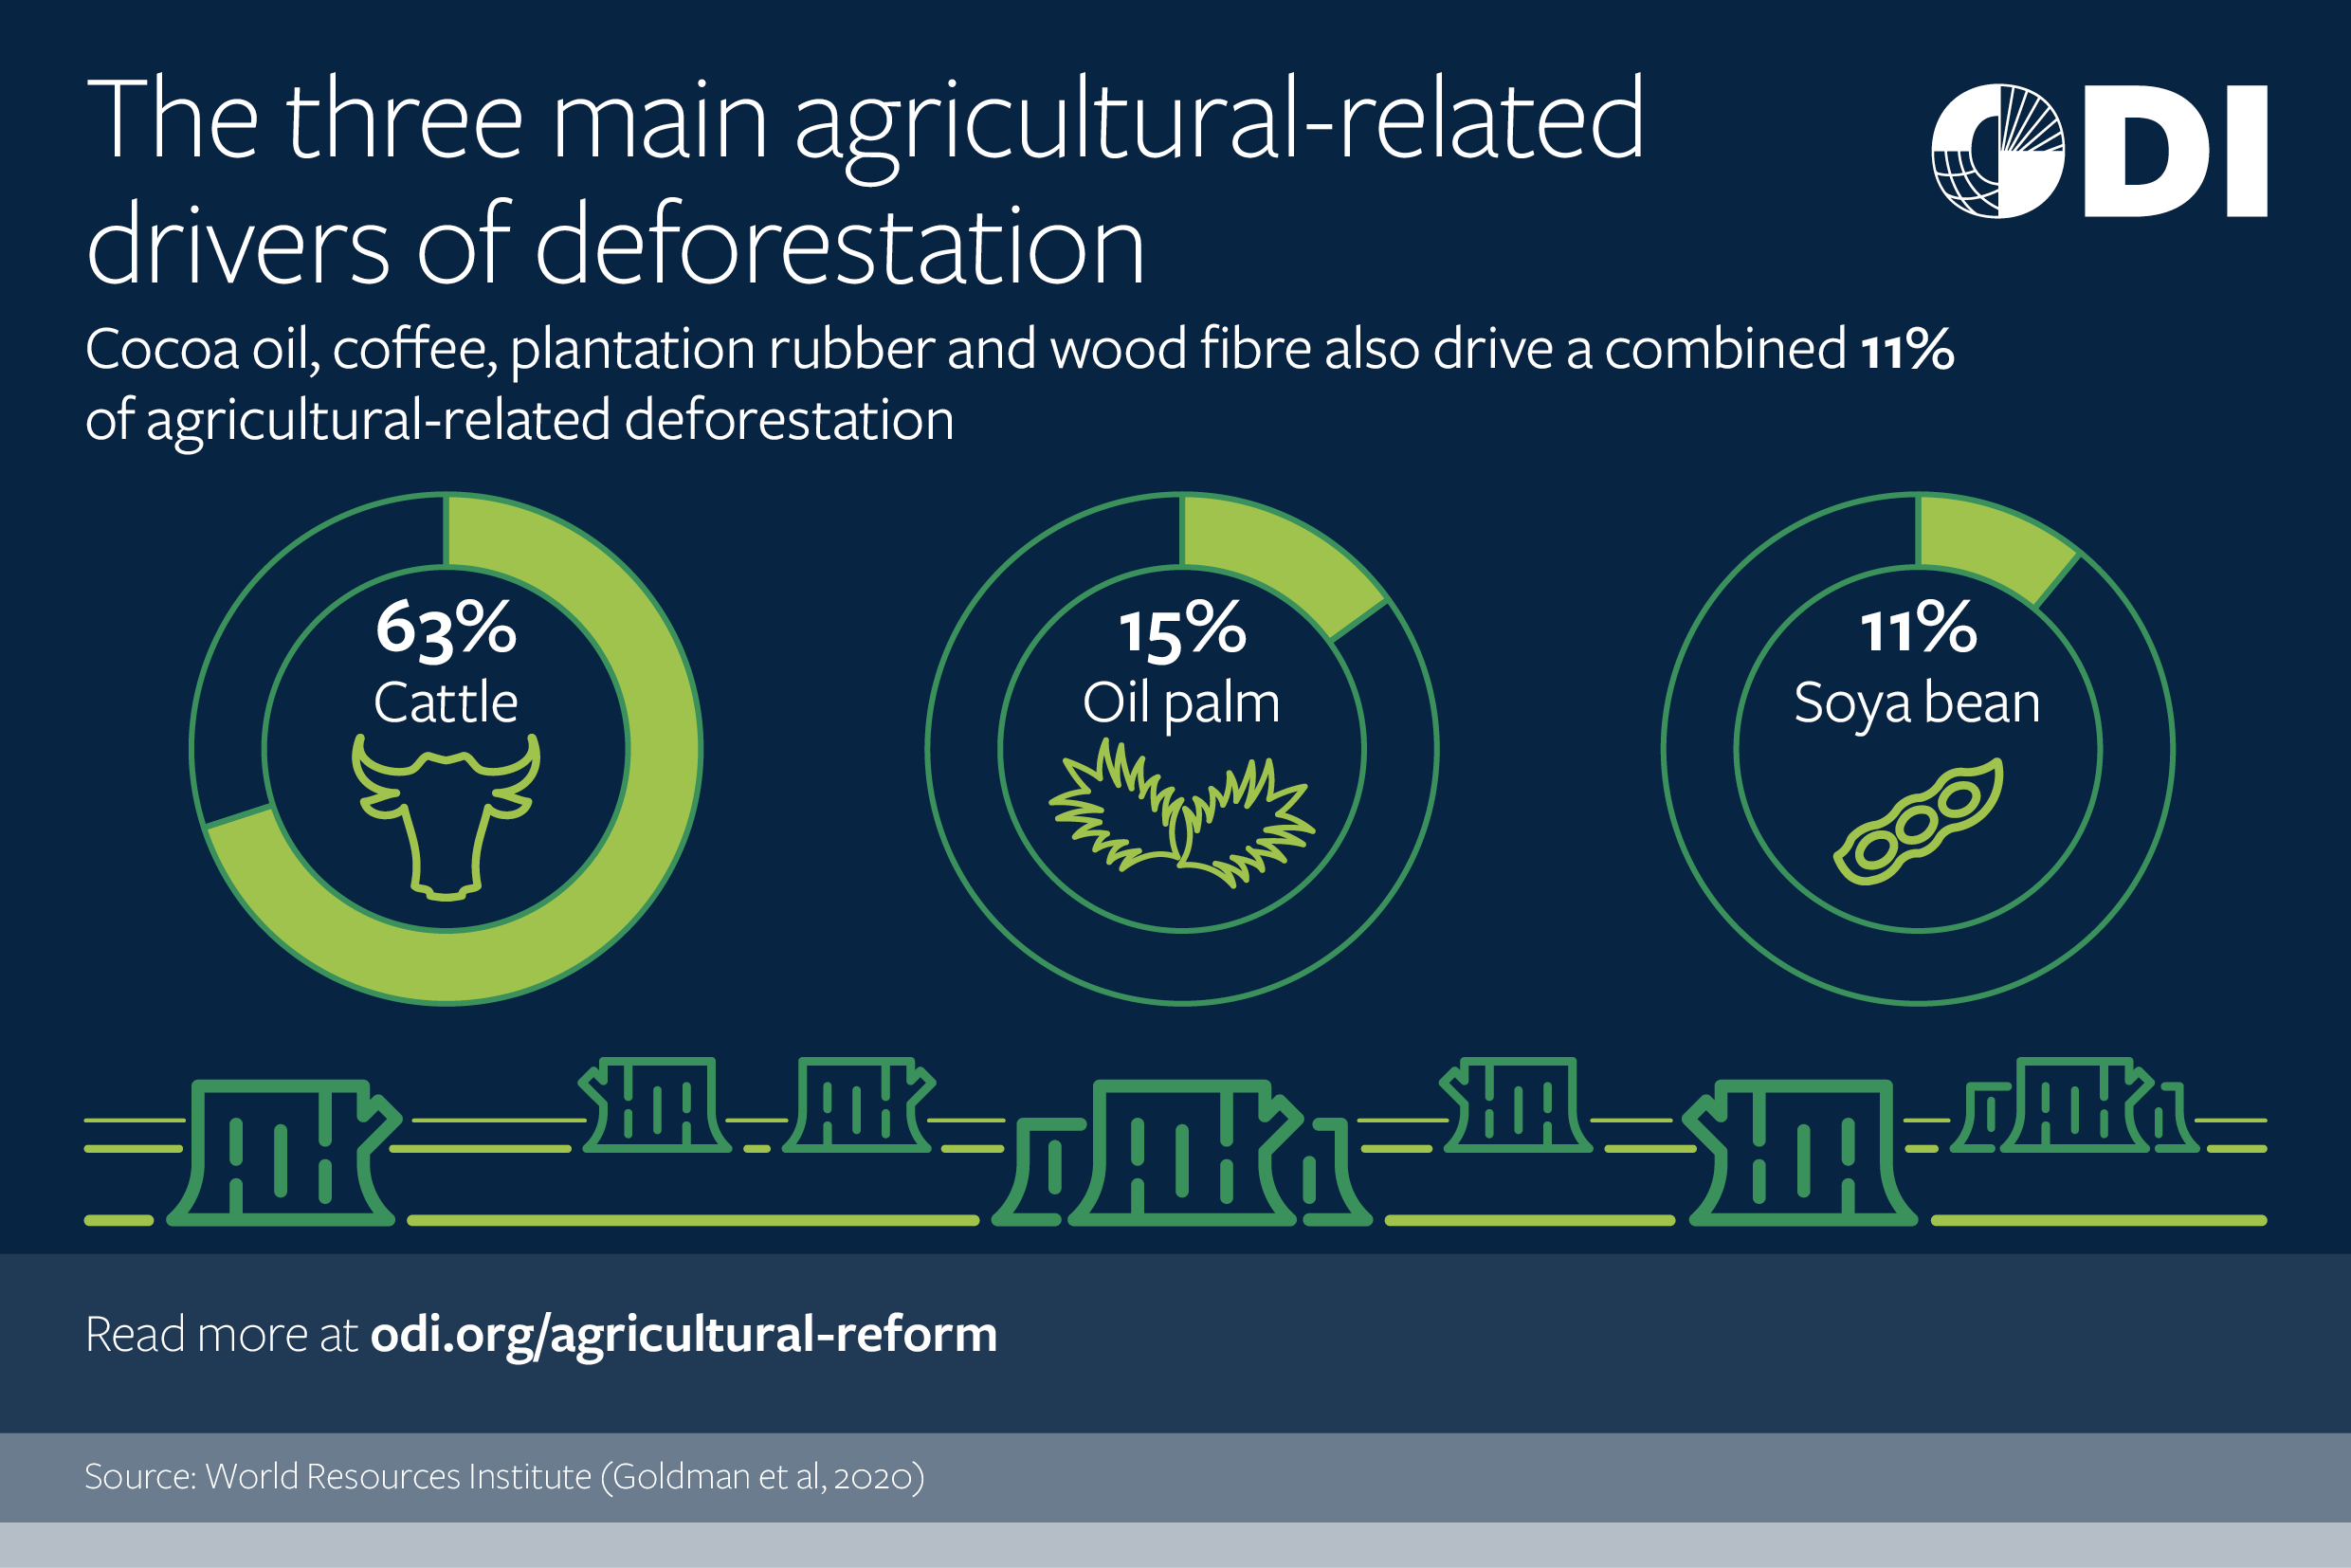 The three main agricultural-related drivers of deforestation.